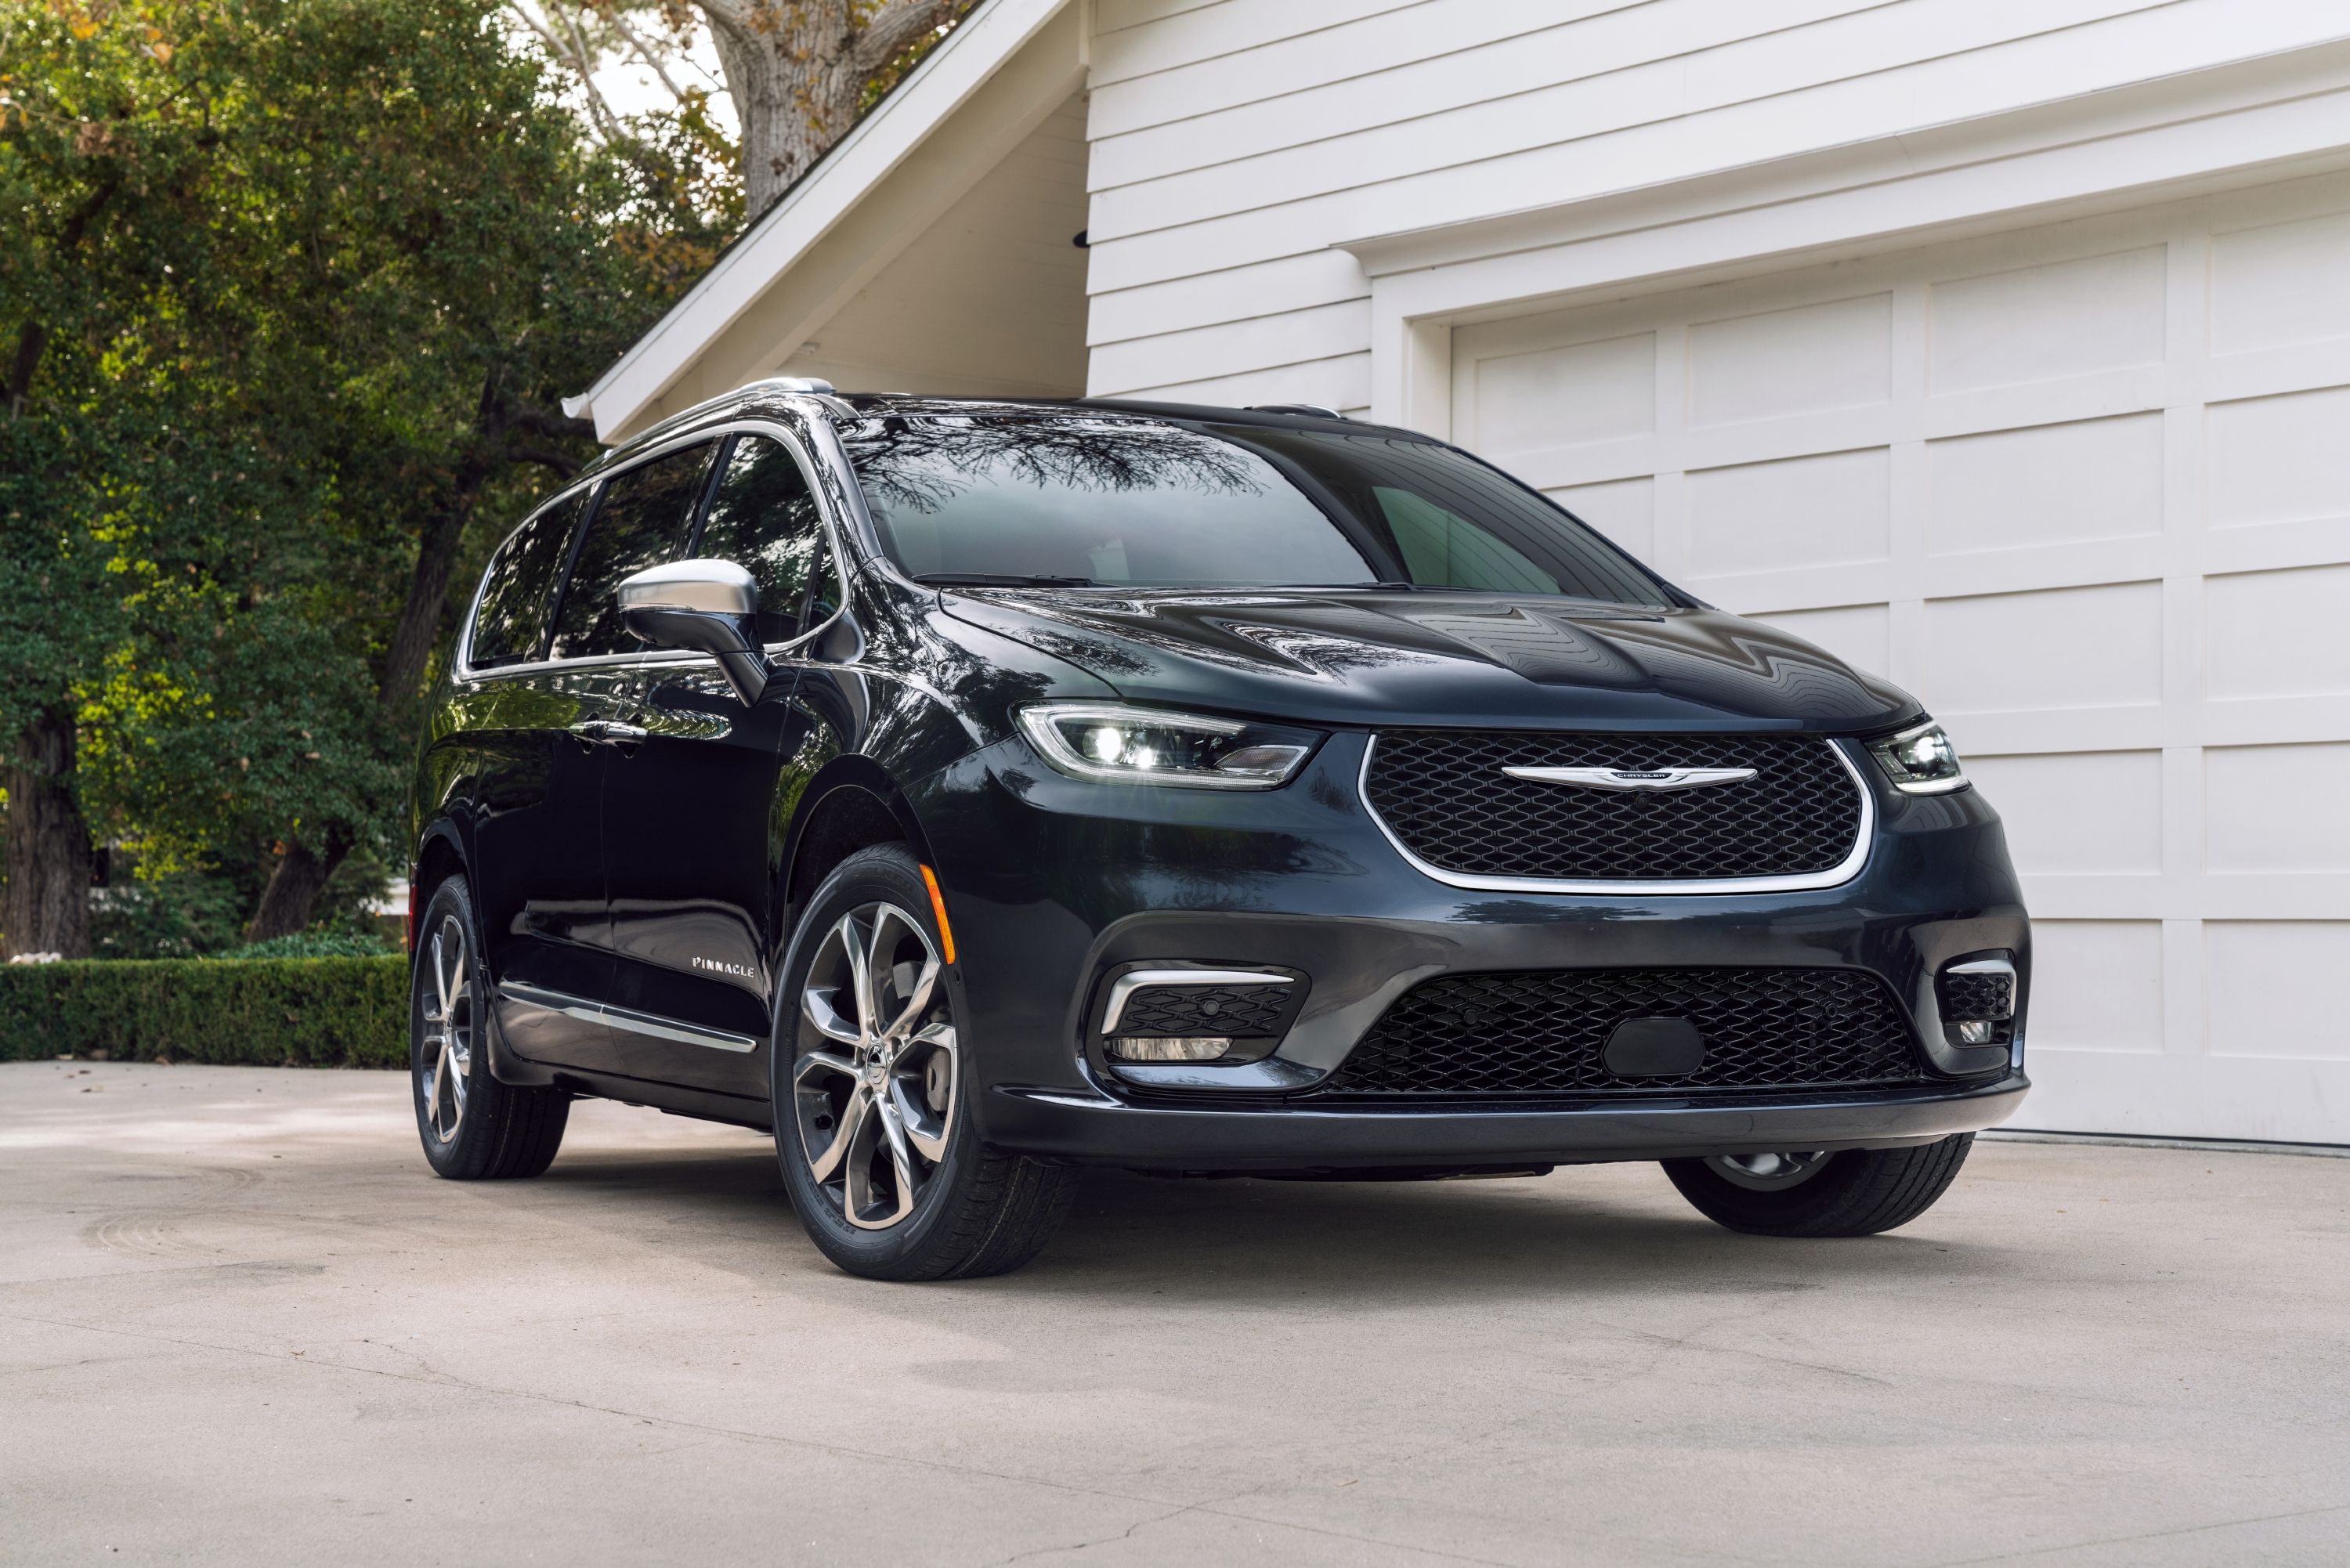 2021 Chrysler Pacifica Priced, Loaded Model Costs Nearly $55K